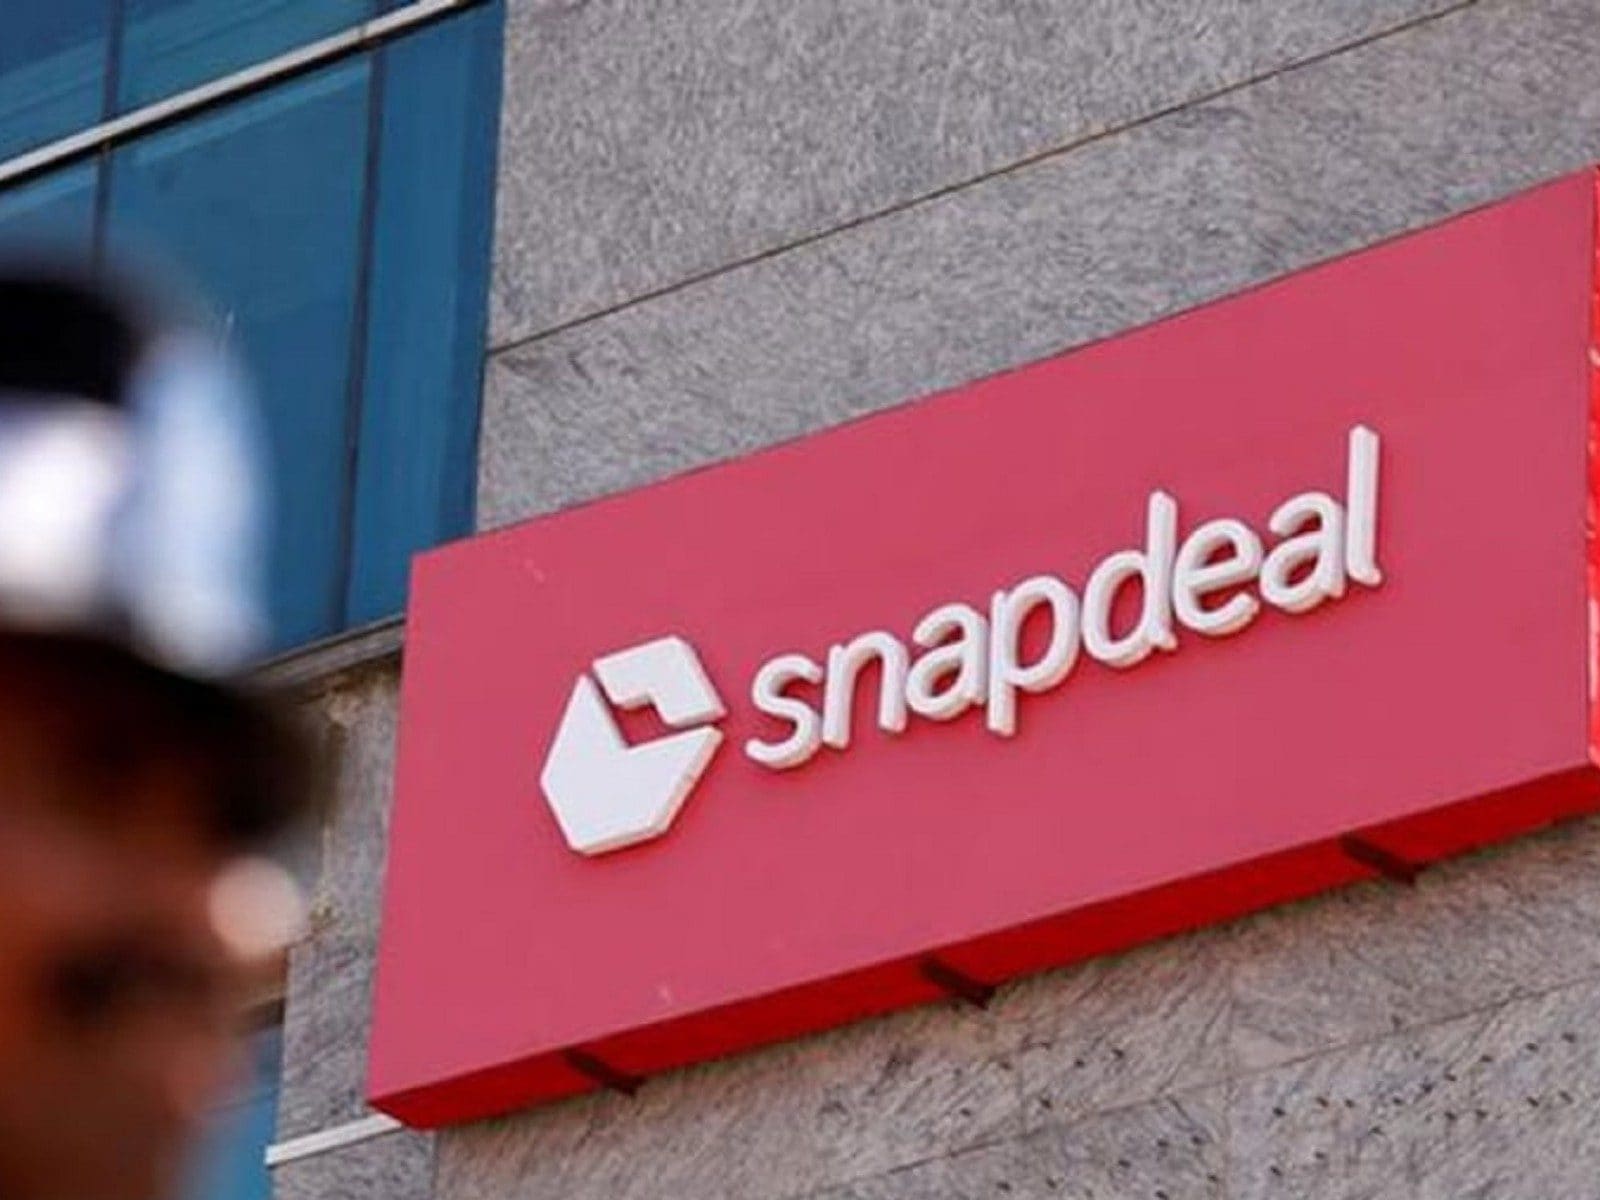 Find Snapdeal product listing service provider by Recheckmate near me |  Karol Bagh, Central Delhi, Delhi | Anar B2B Business App